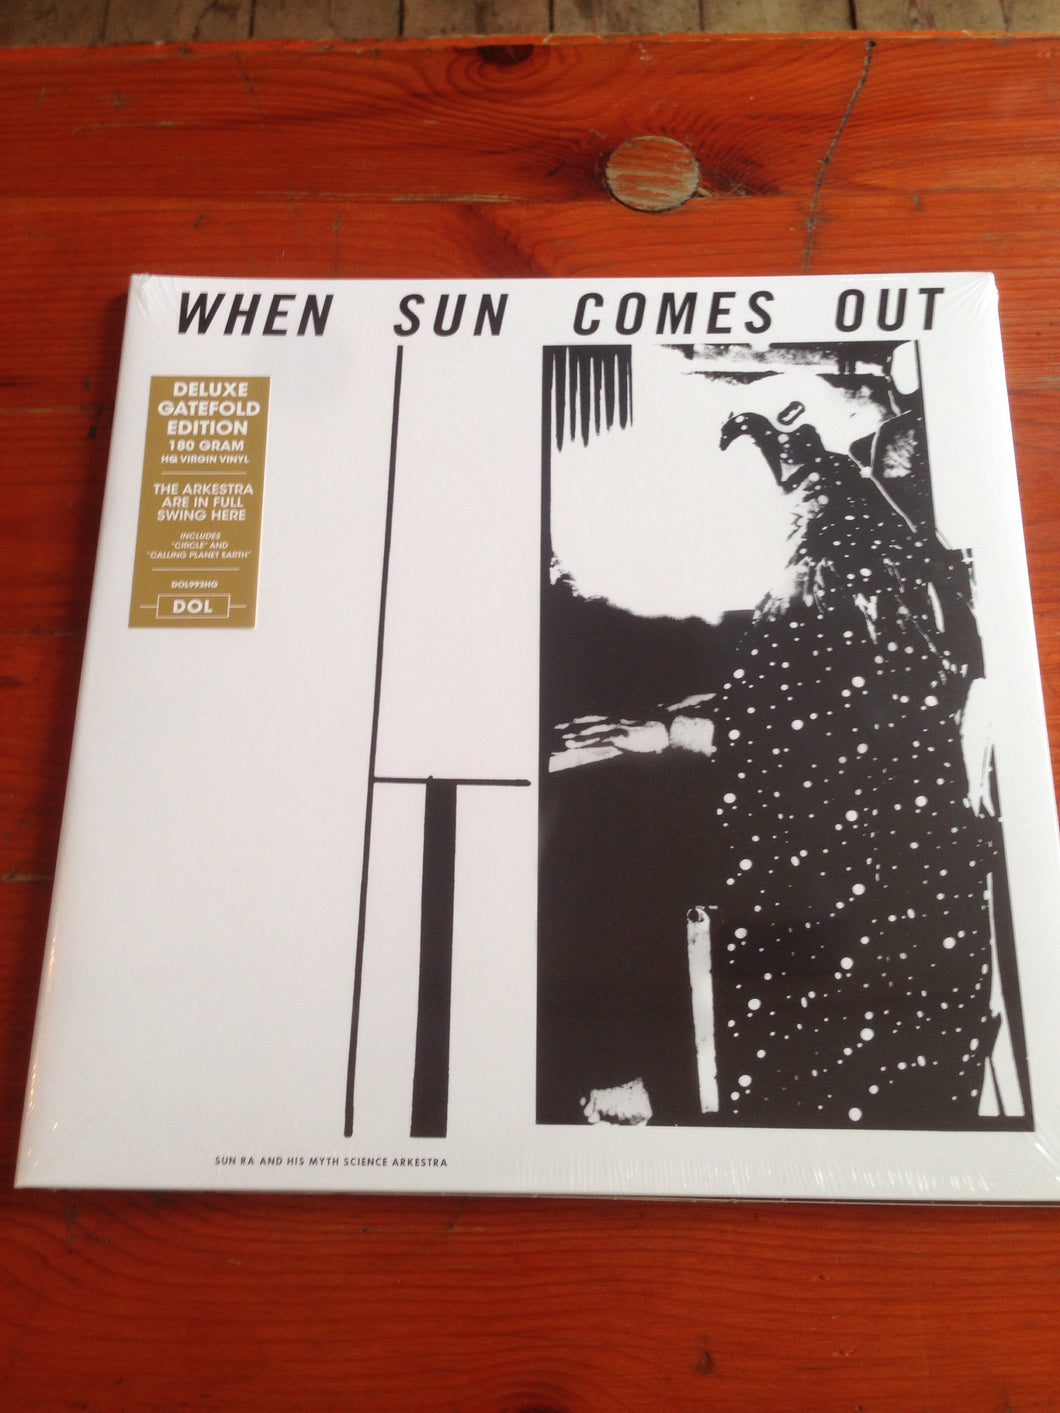 Sun Ra and His Myth Science Arkestra  - When The Sun Comes Out